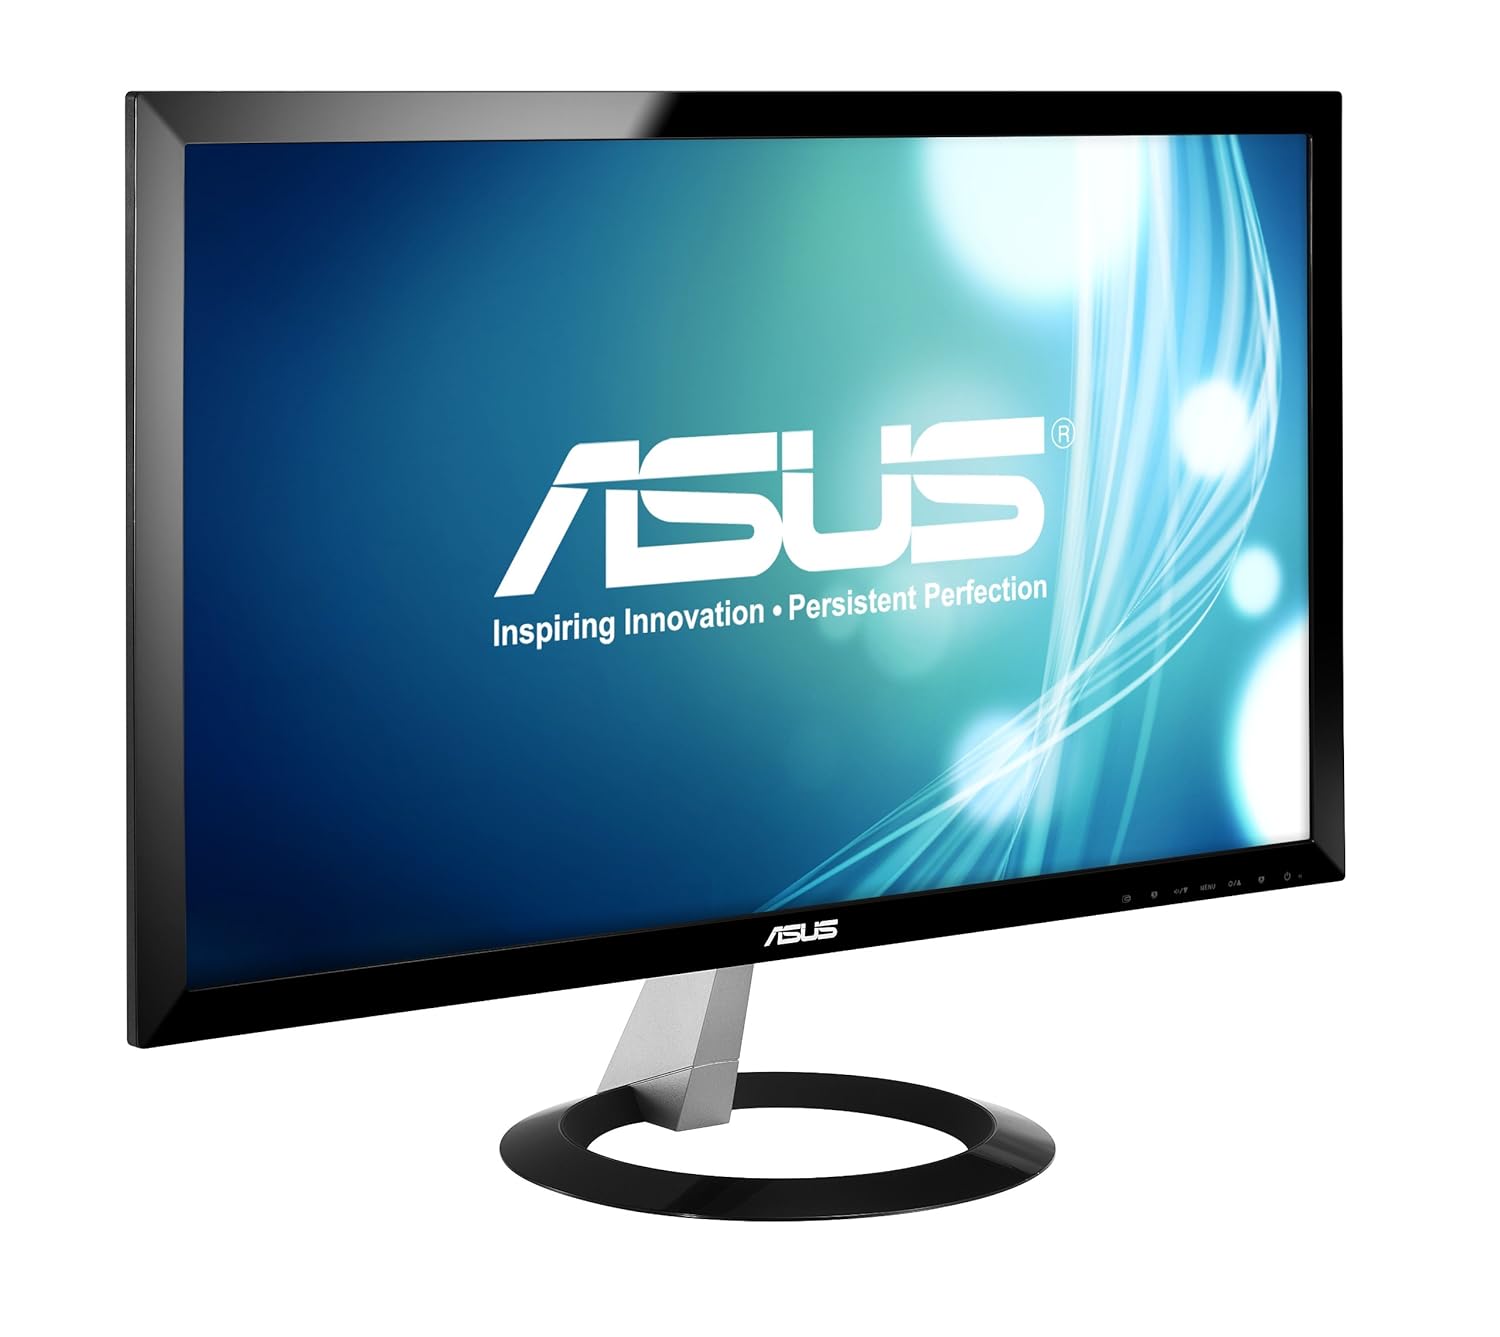 Asus VX238T 58,4 cm (23 Zoll) LED-Monitor